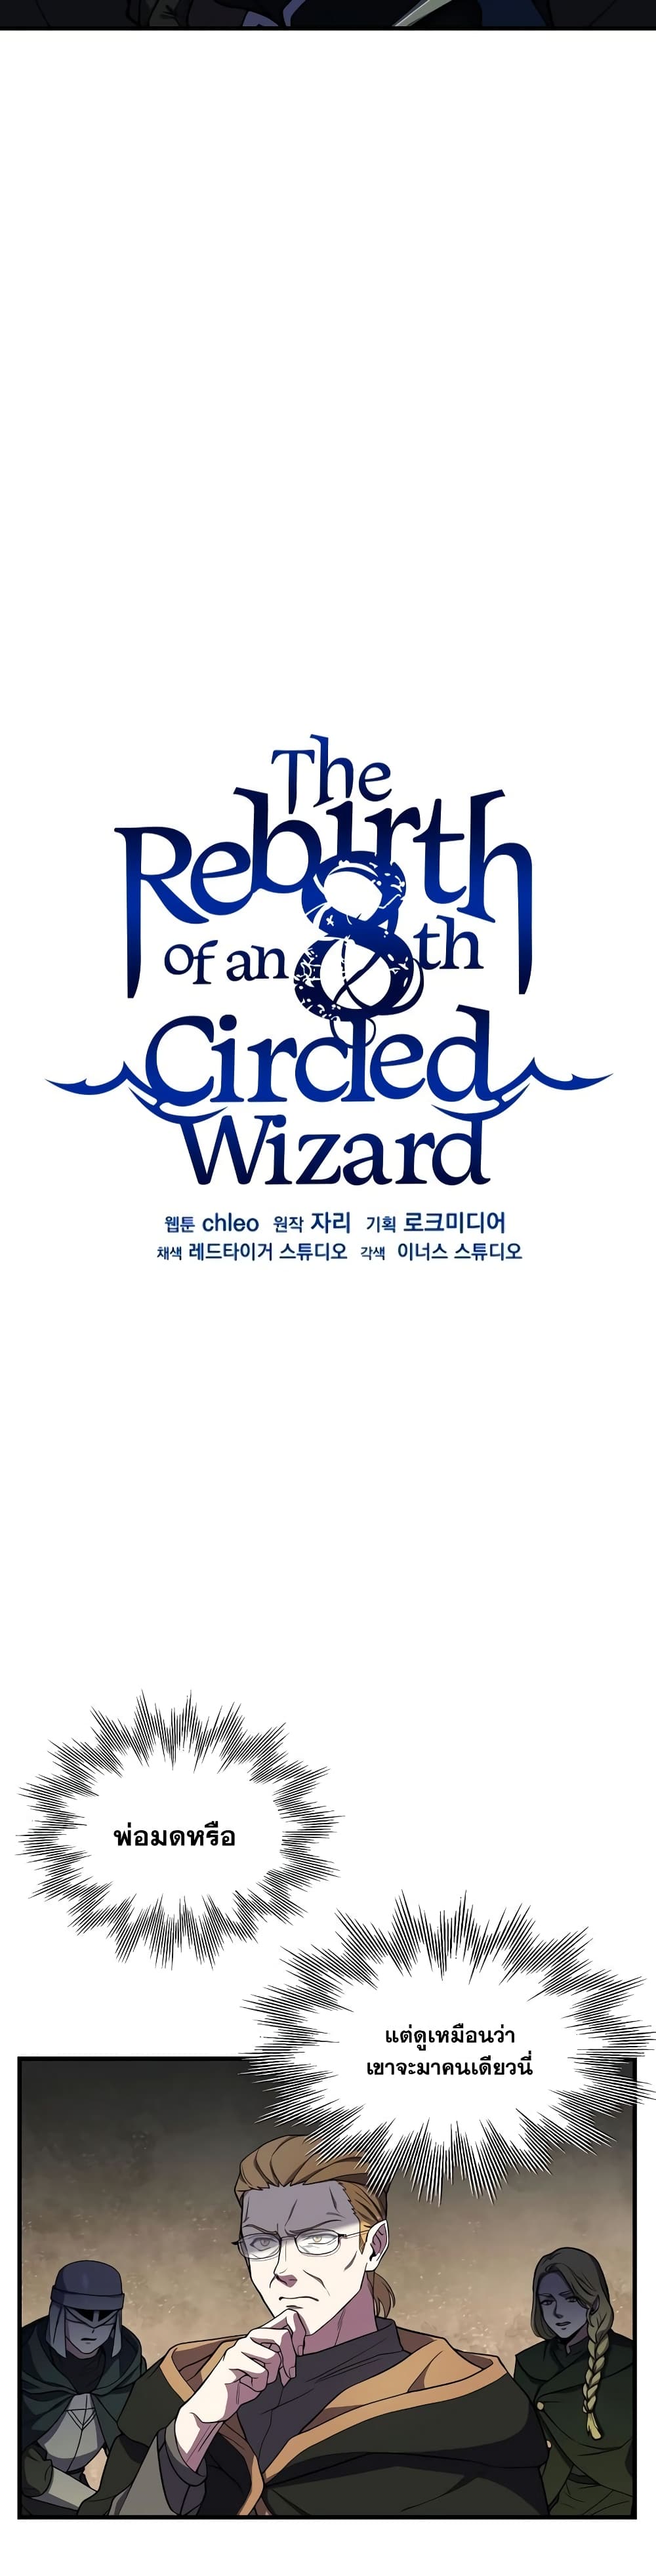 The Rebirth of an 8th Circled Wizard 76-76